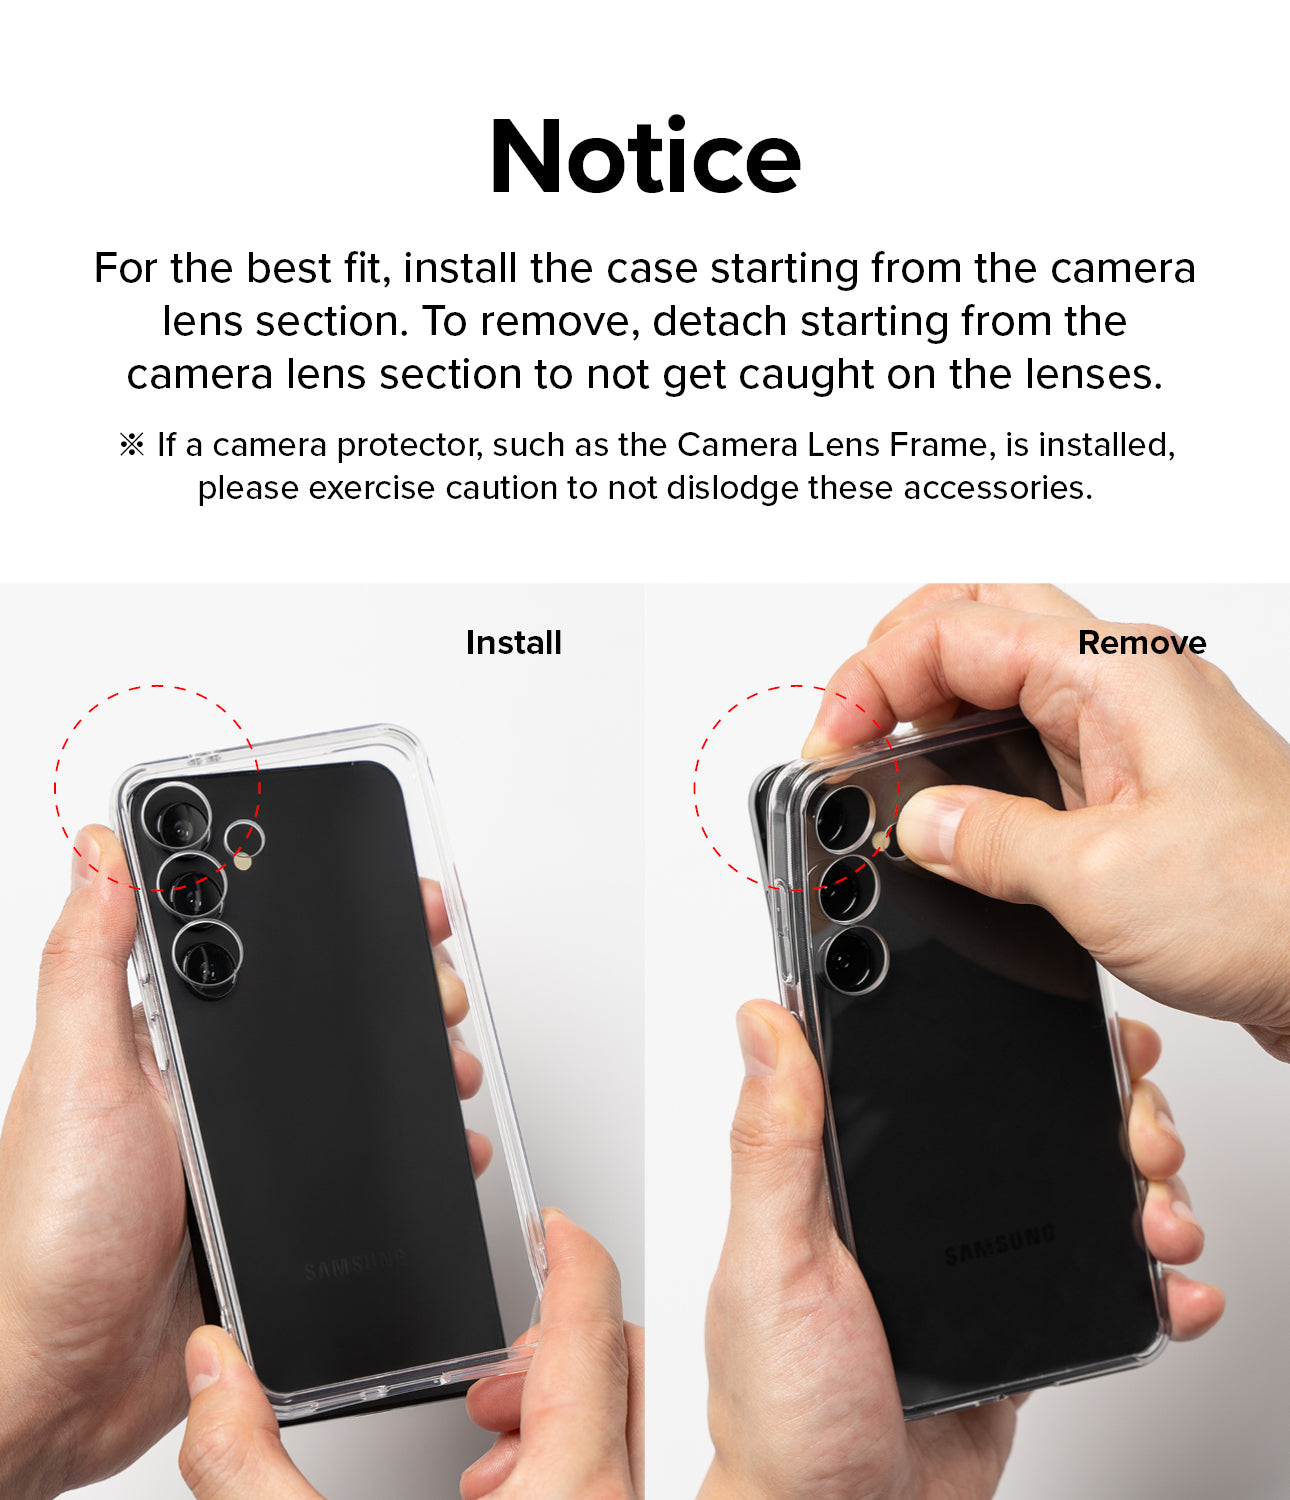 Galaxy A55 Case | Fusion Card - Notice. For the best fit, install the case starting from the camera lens section. To remove, detach starting from the camera lens section to not get caught on the lenses.